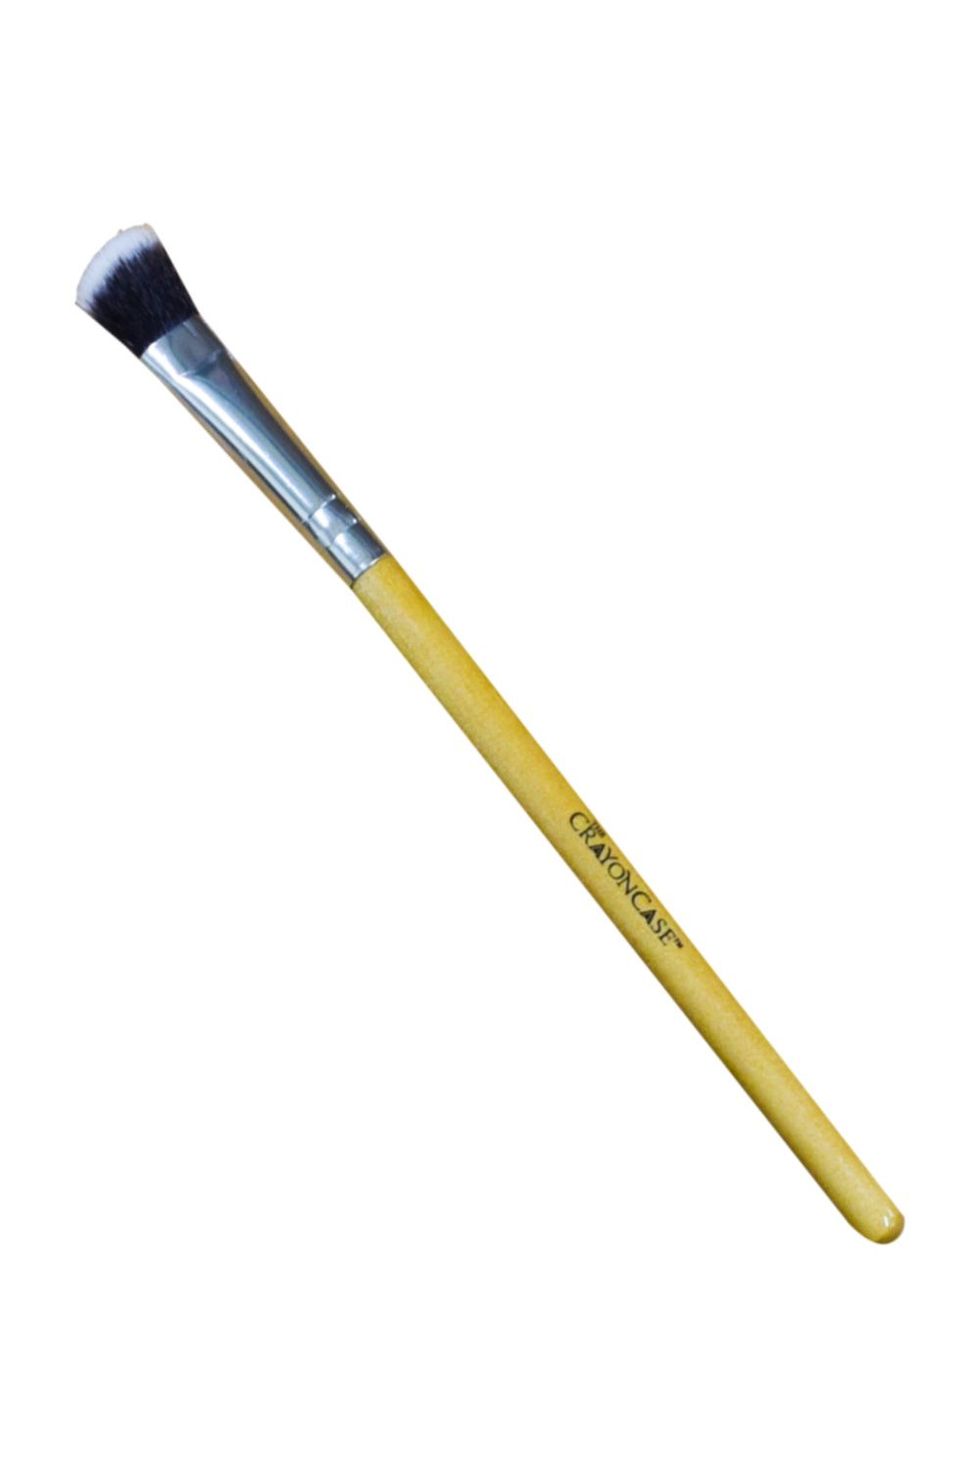 The Crayon Case Angle Brush